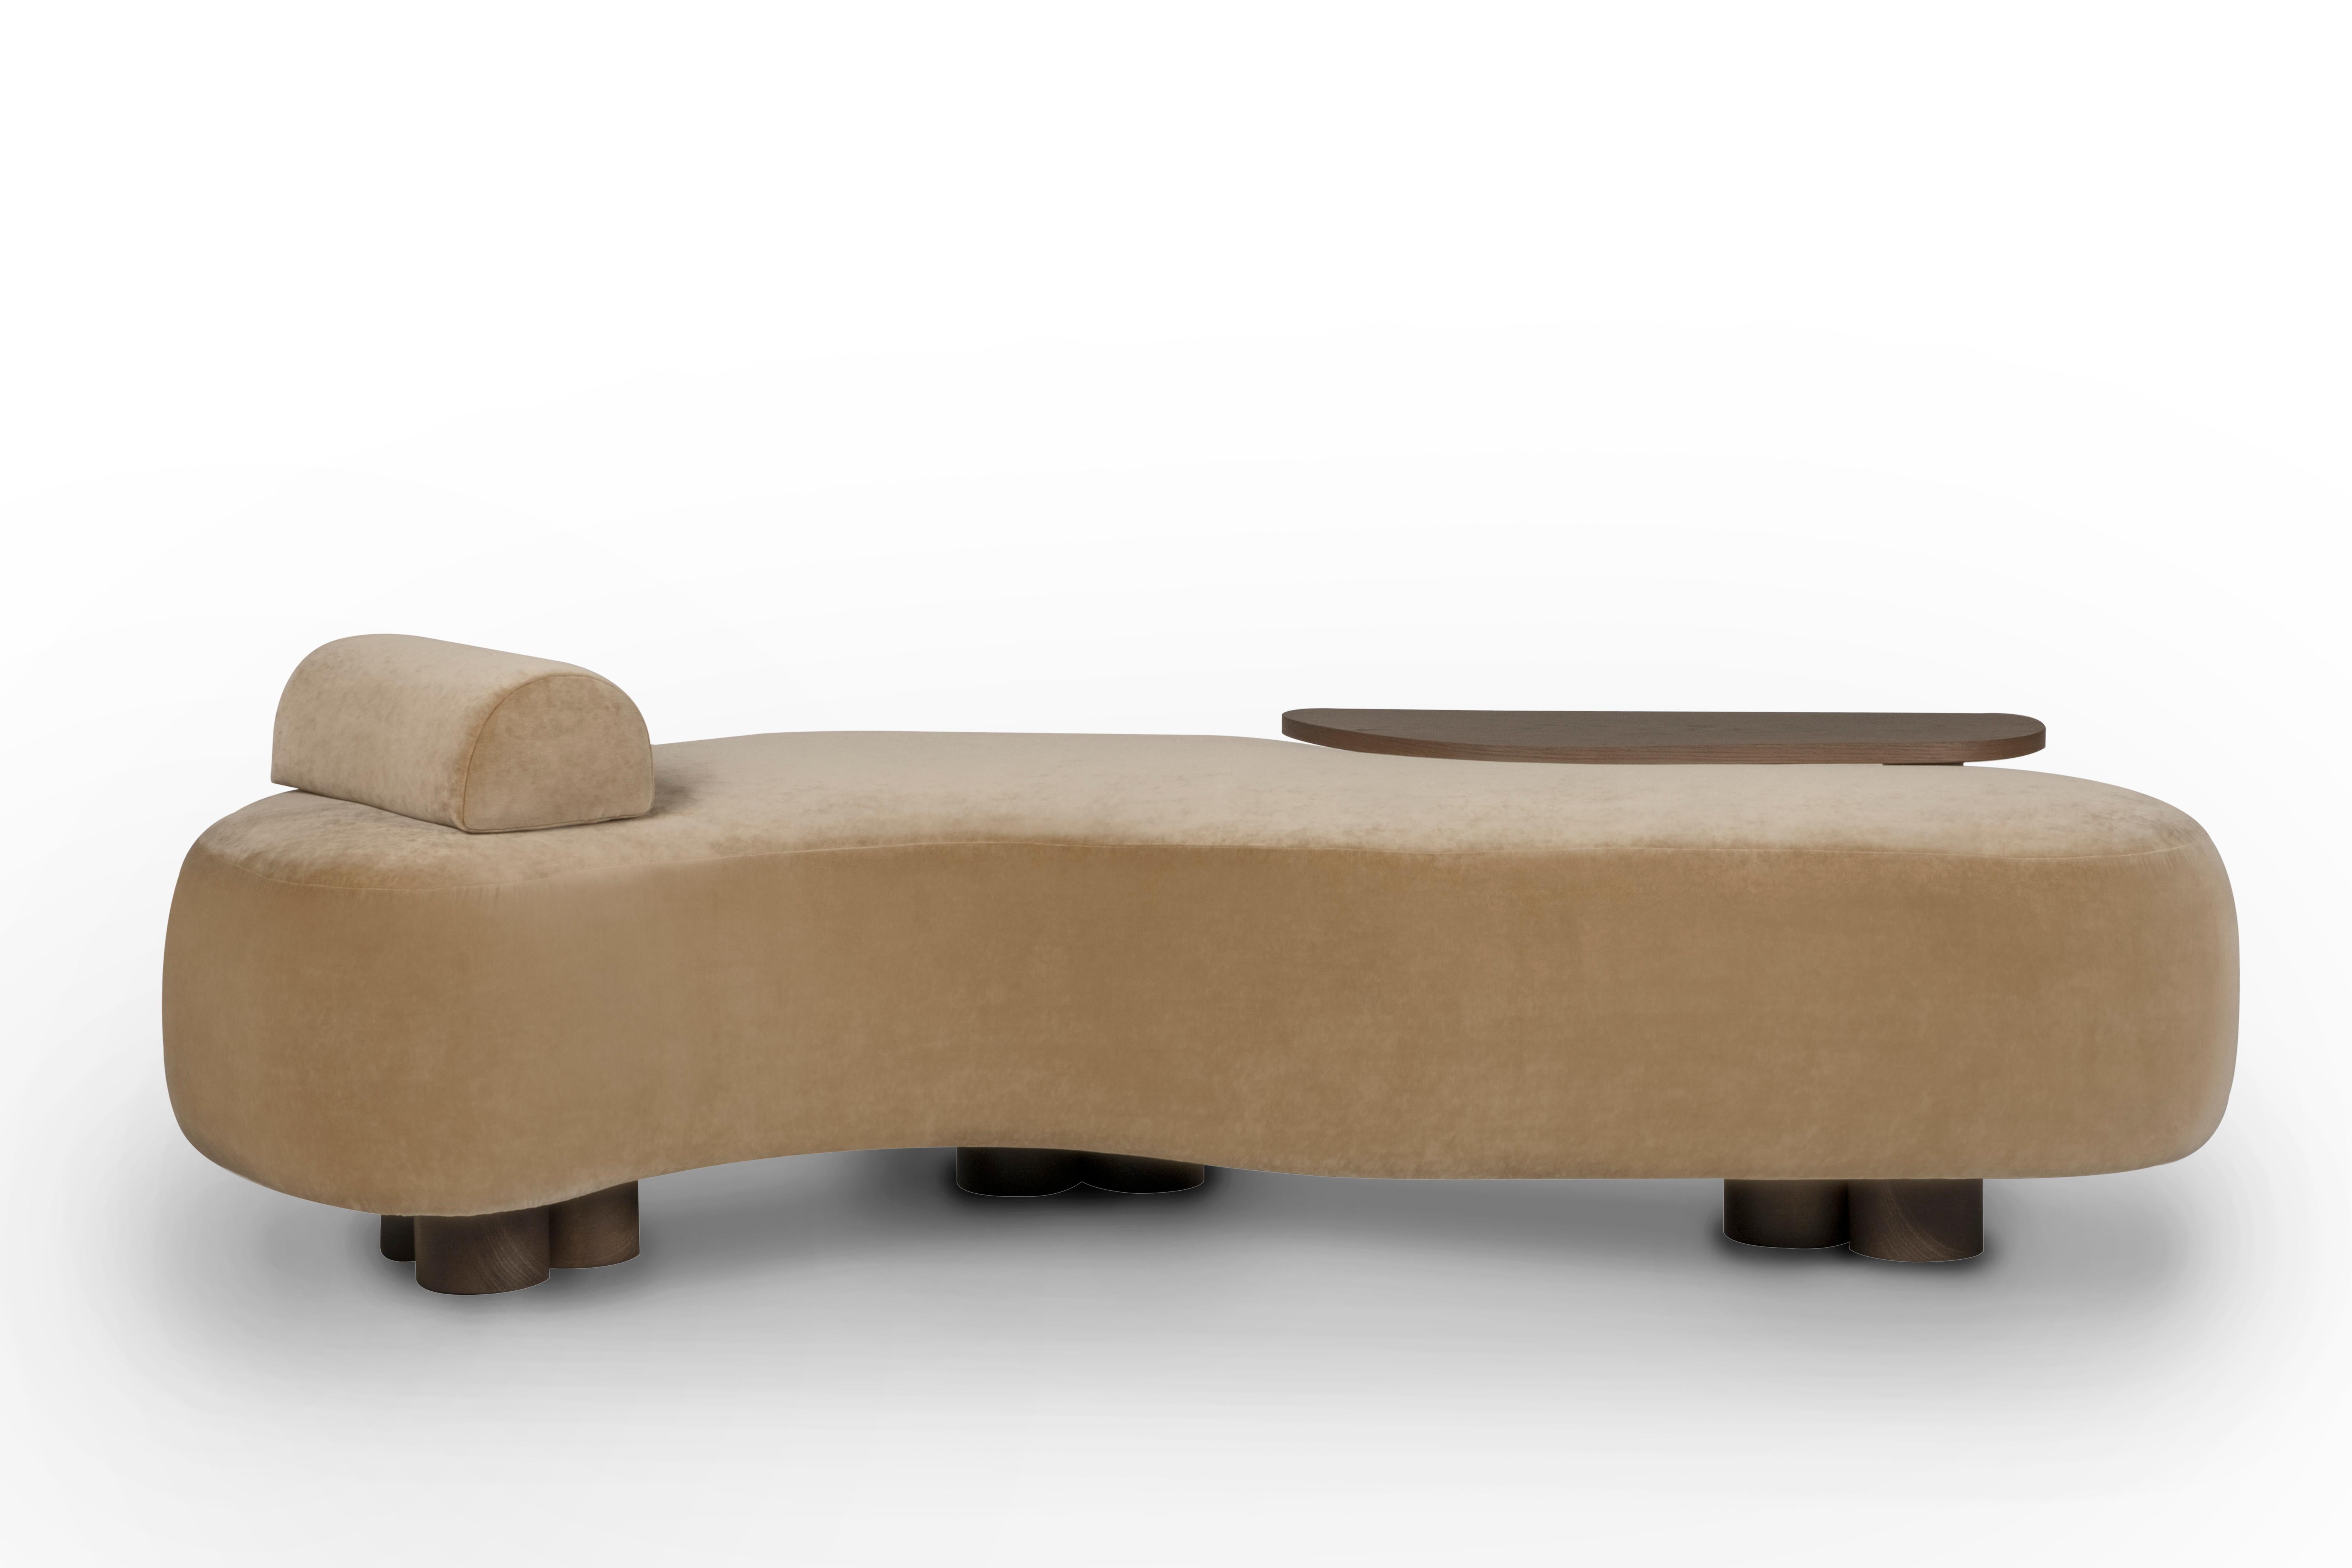 Minho Chaise Longue, Contemporary Collection, Handcrafted in Portugal - Europe by Greenapple.

Designed by Rute Martins for the Contemporary Collection, the Minho chaise lounge with a wooden side table is a modern interpretation of the traditional